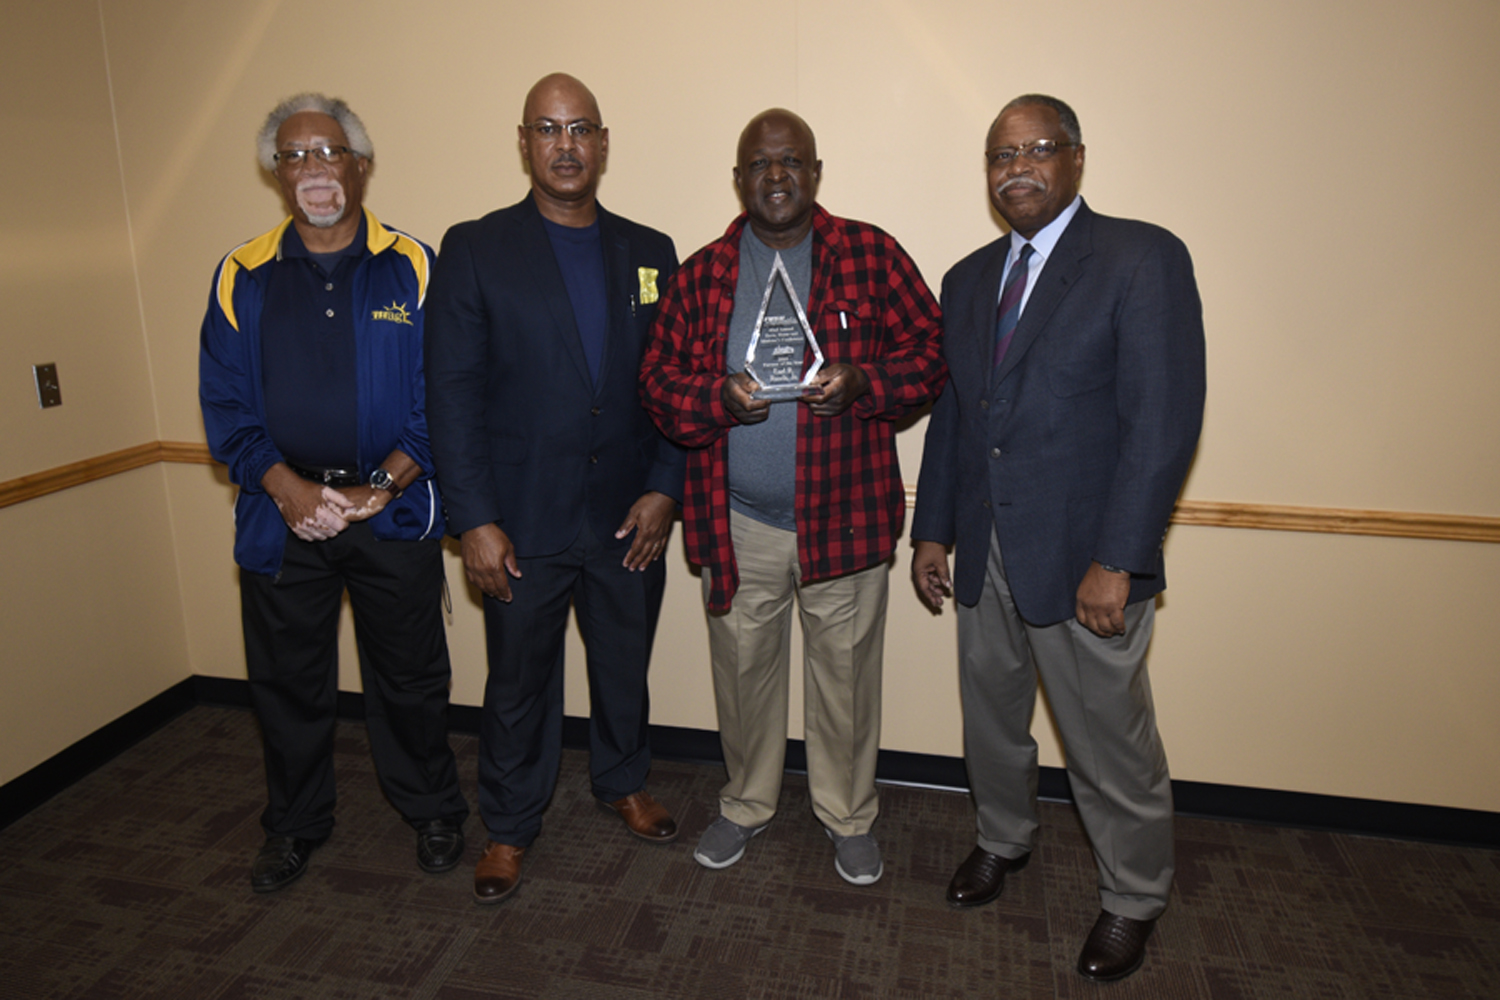 Earl Rawls (holding award) receives the 2019 ANR Farm Family of the Year Award from FVSU Extension personnel (from left) Leon Porter, program assistant for Houston County; Charlie Grace, FVSU Extension agent for Dougherty, Lee and Worthy Counties (far rig